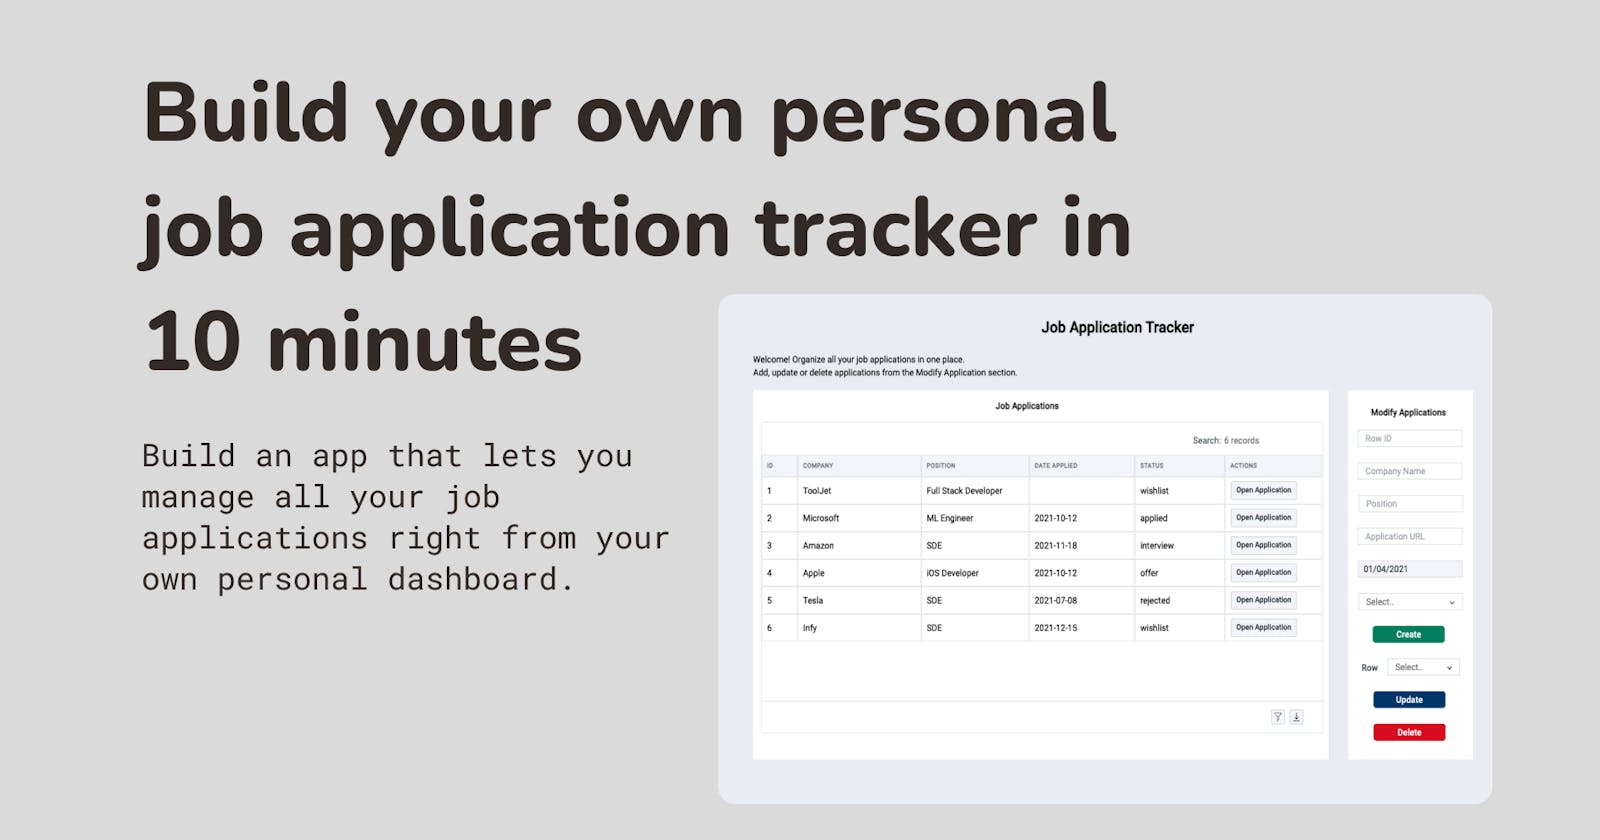 Build your own personal job application tracker in 10 minutes